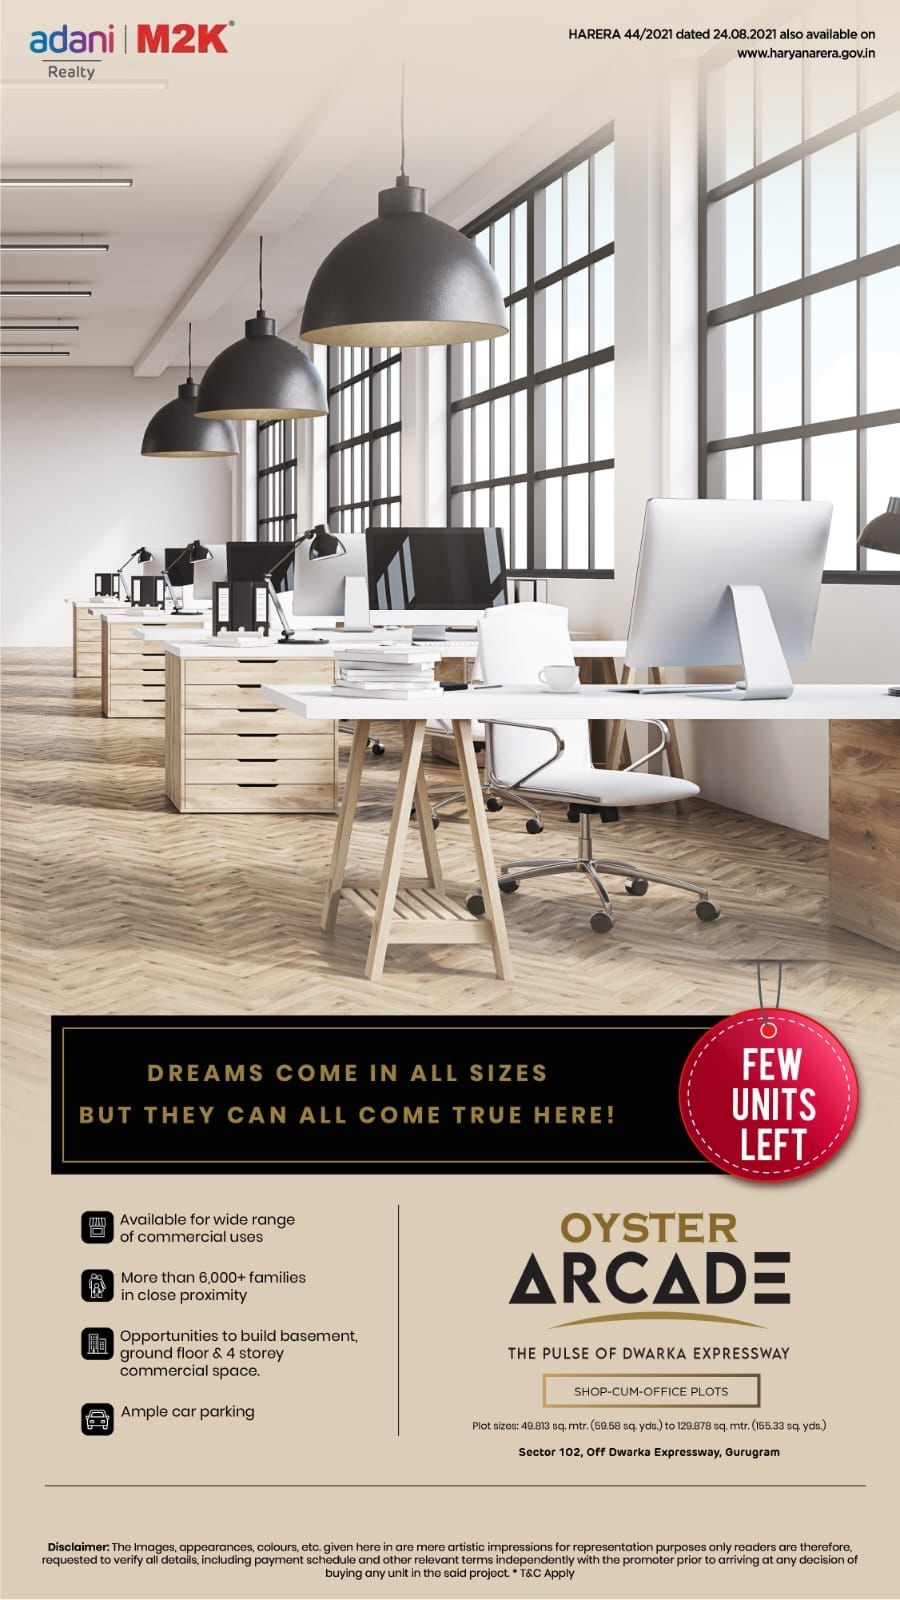 Few units left at Oyster Arcade in Sector 102, Gurgaon Update